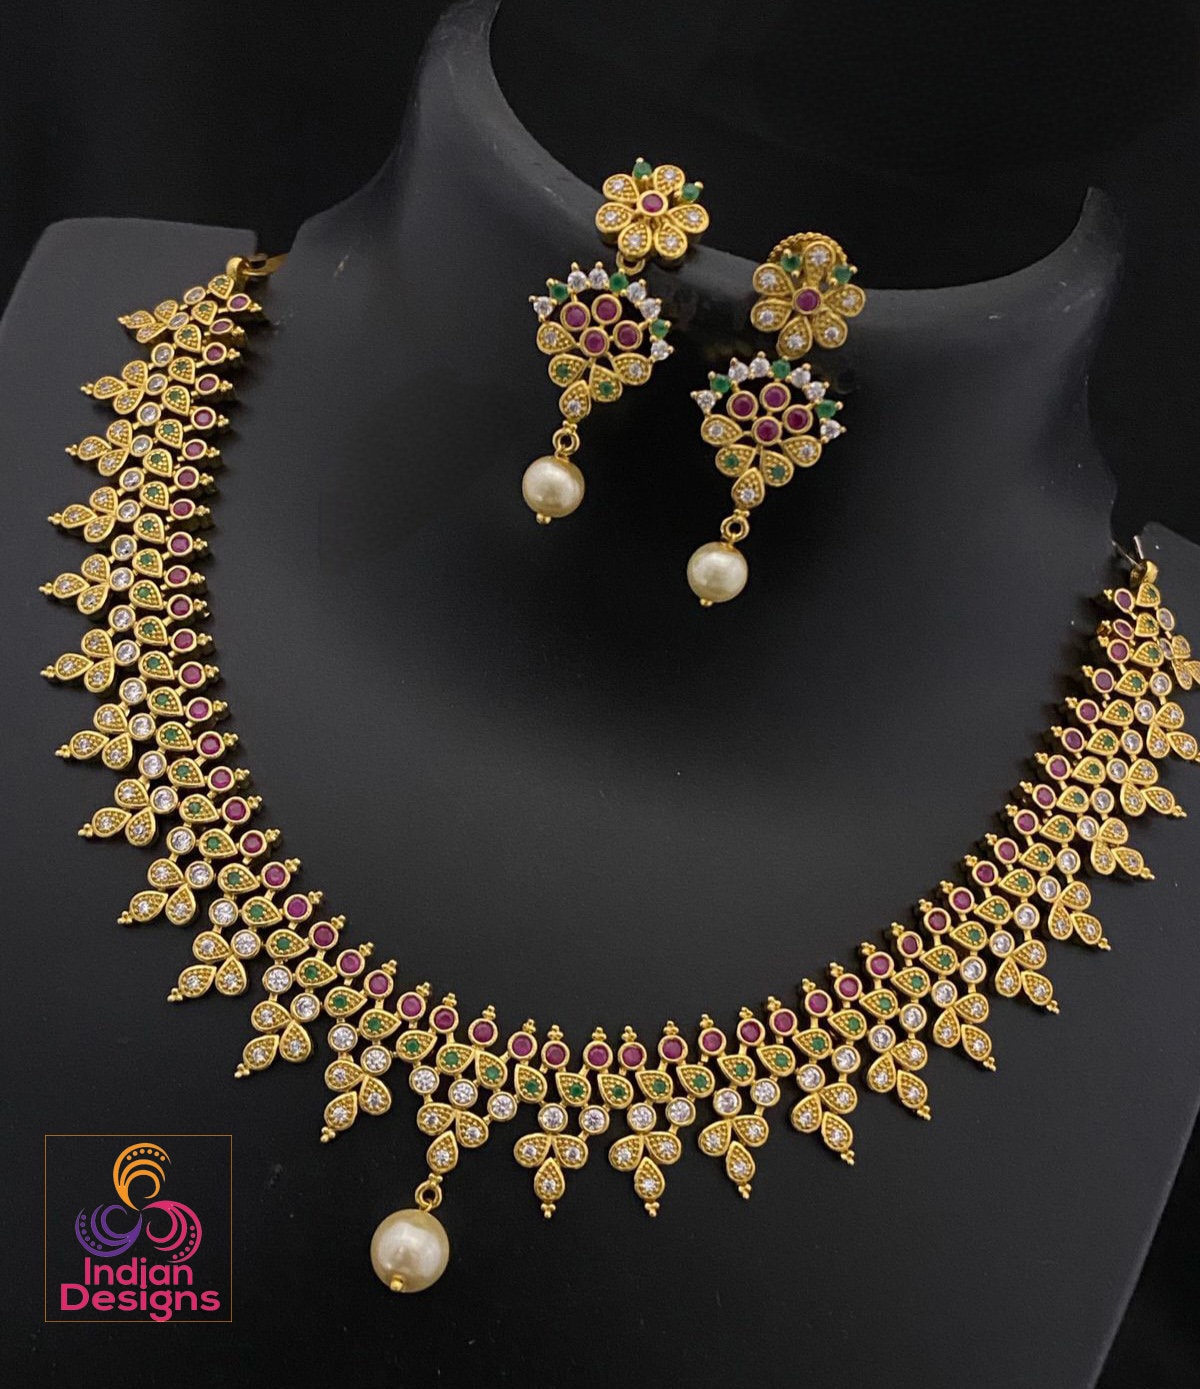 Gold-Tone Ruby and Emerald Choker Necklace Set with Pearl Drops and Matching Earrings| traditional South Indian style matte finish necklace